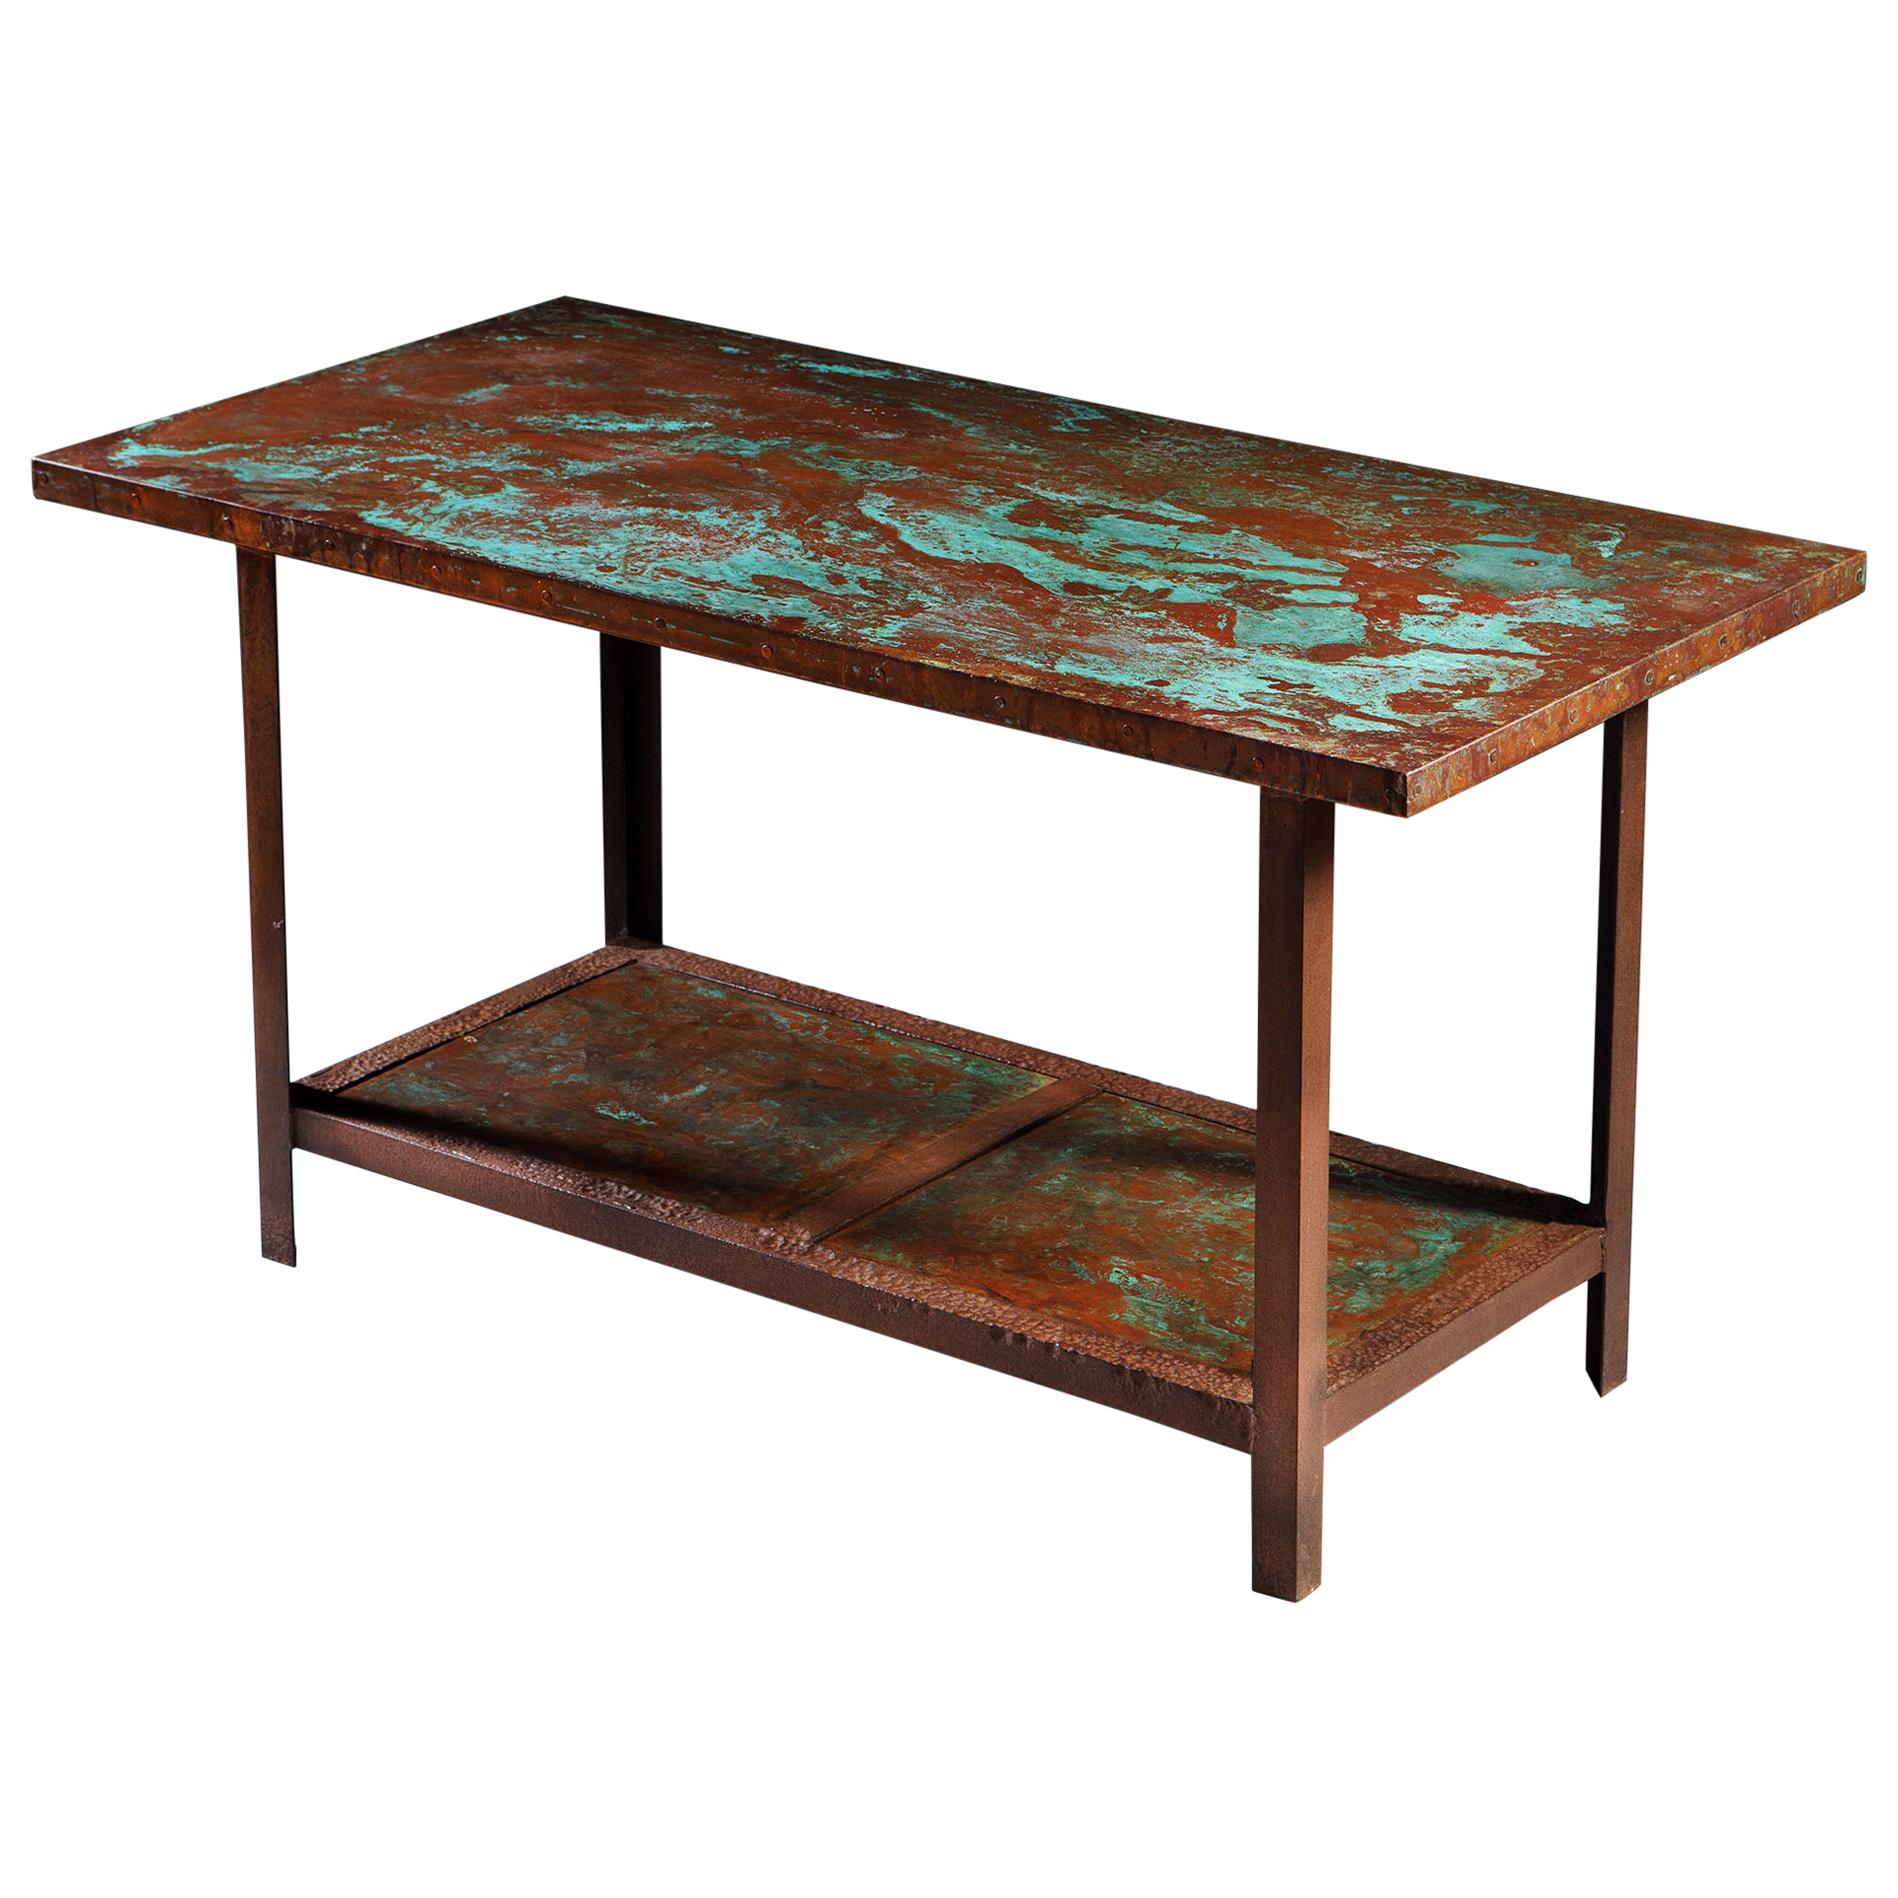 Large 20th Century French Copper Metal Table with Verdigris Patination